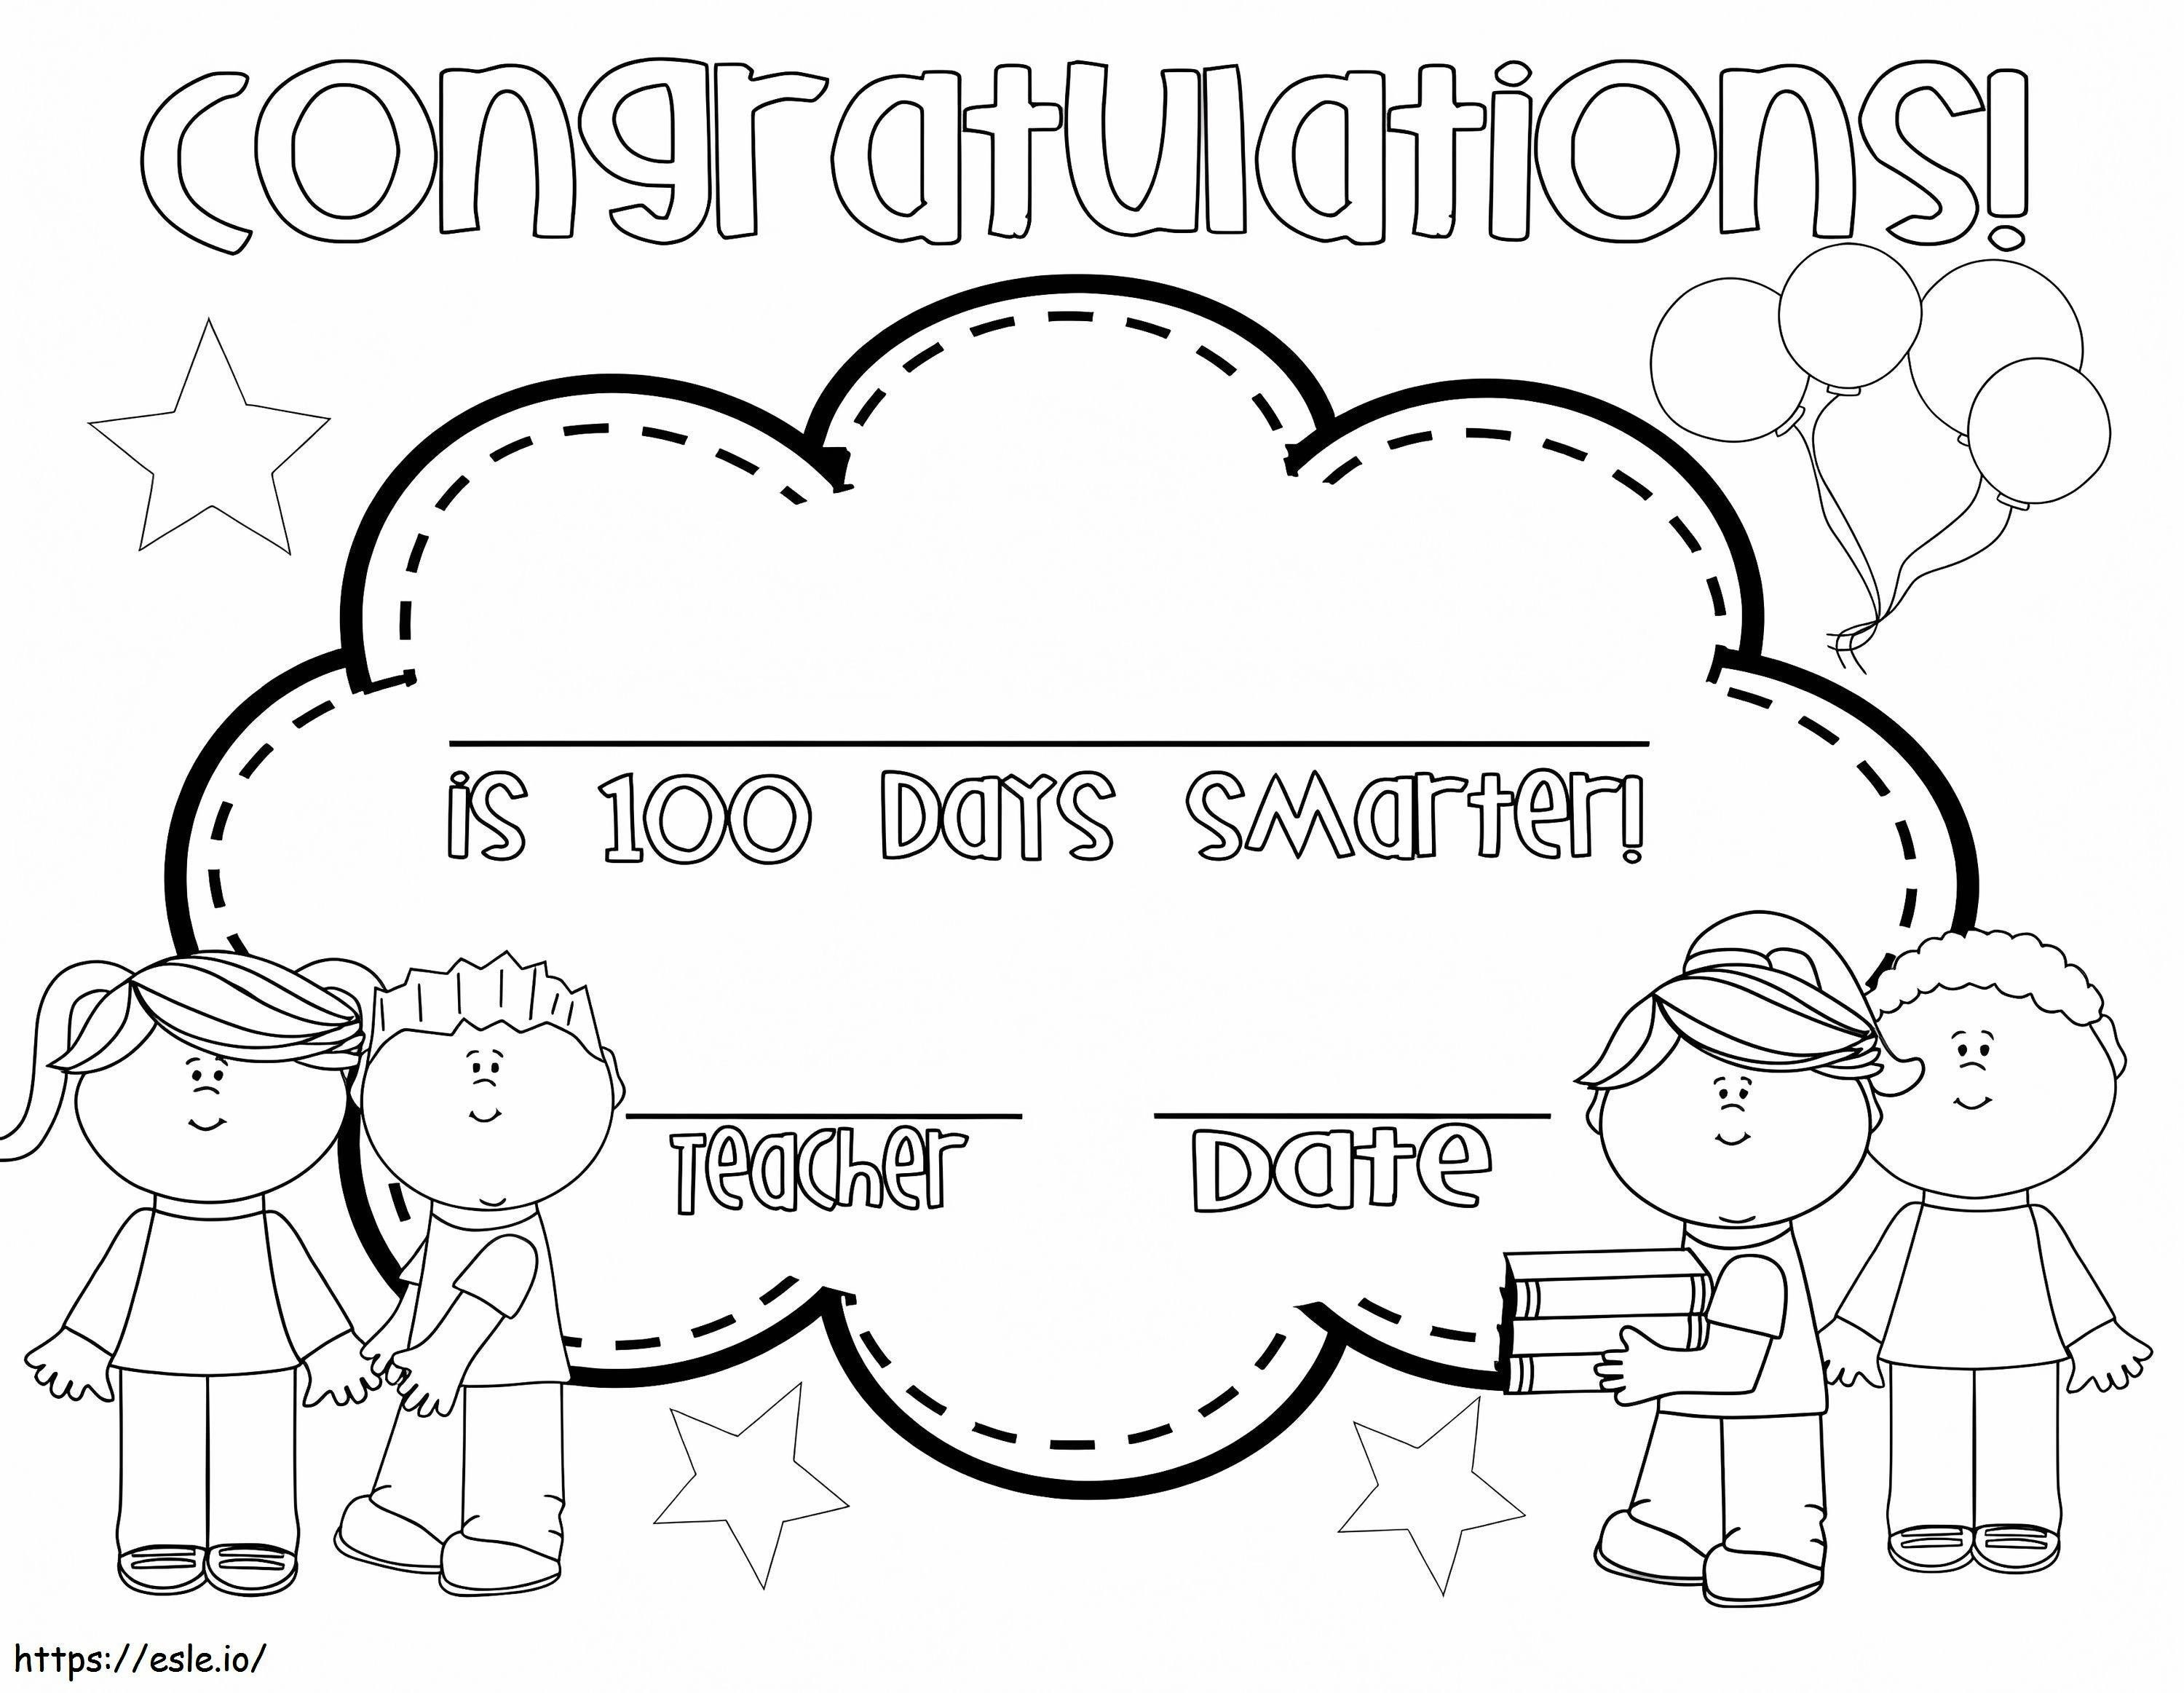 100 Days Smarter coloring page